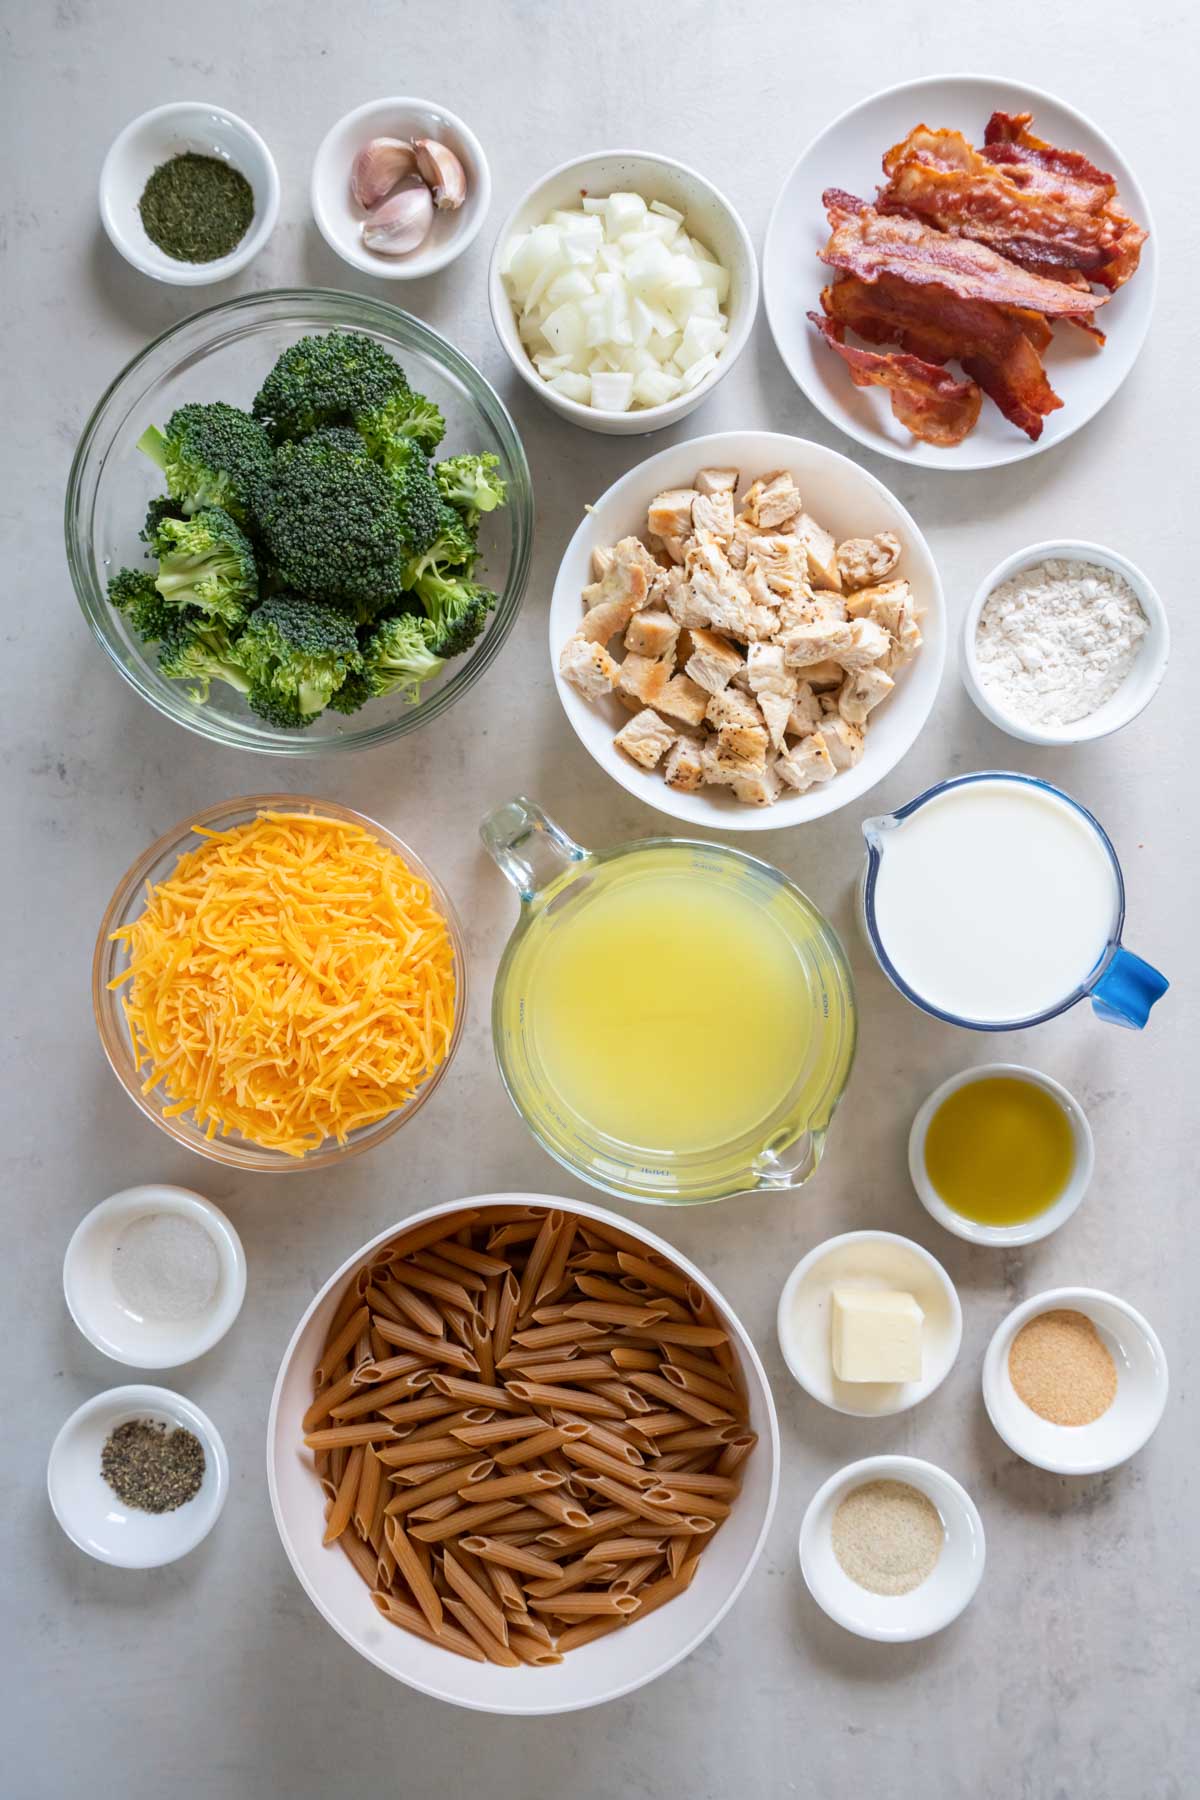 Ingredients for chicken bacon ranch casserole recipe.